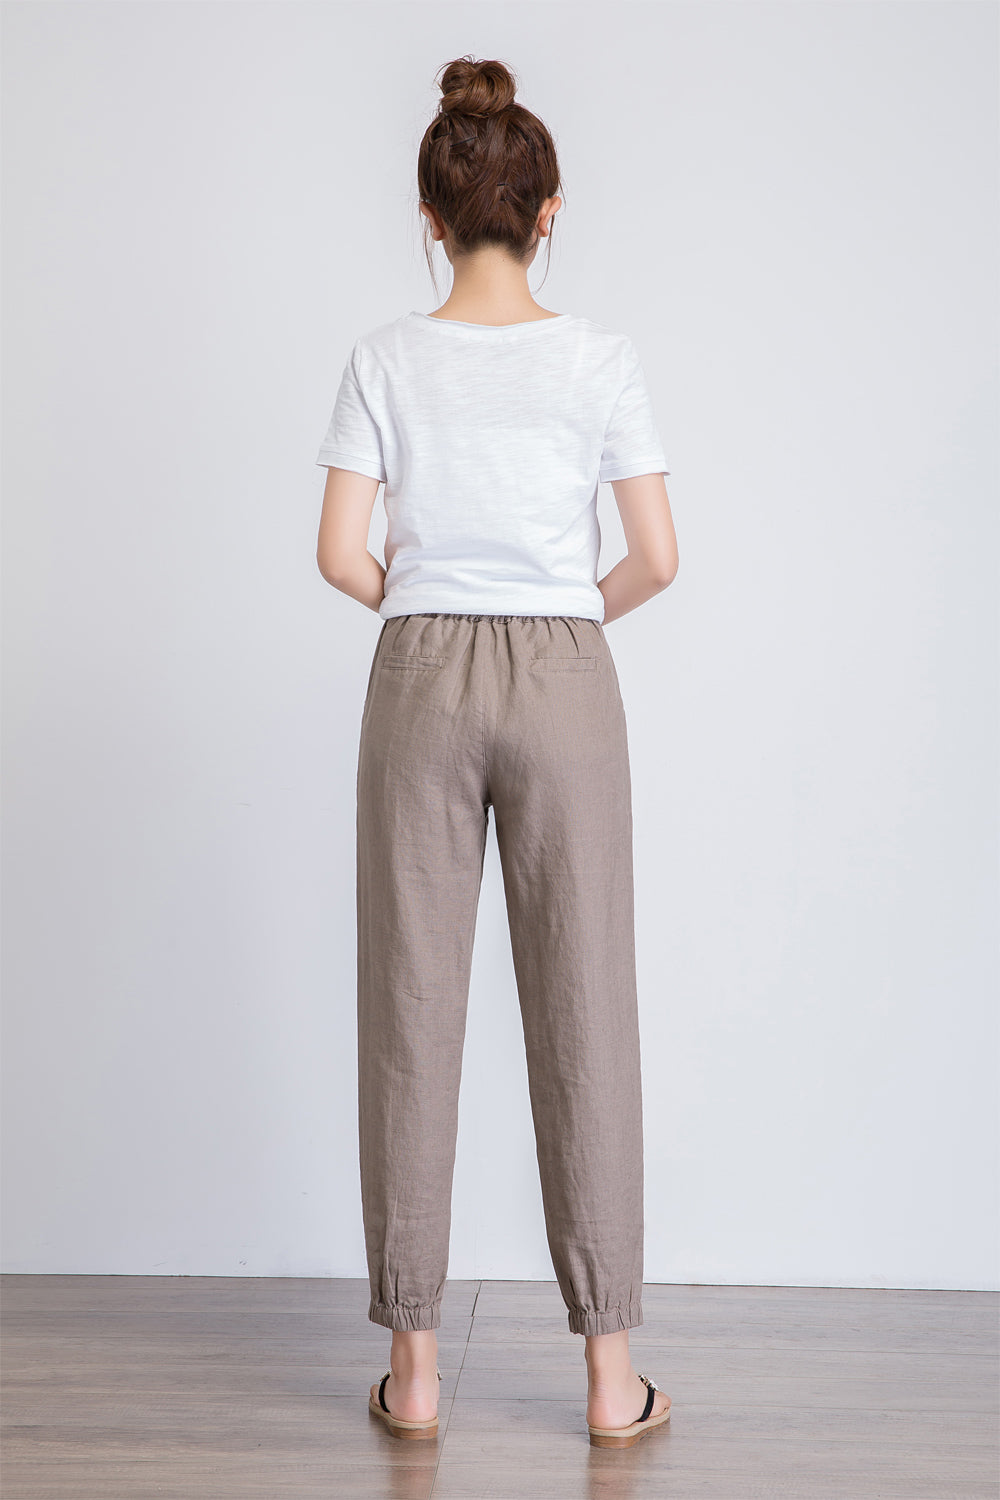 Womens Linen Pants, Women High Waisted Wide Leg Drawstring Casual Loose  Trousers with Pockets Comfy Capri Pants